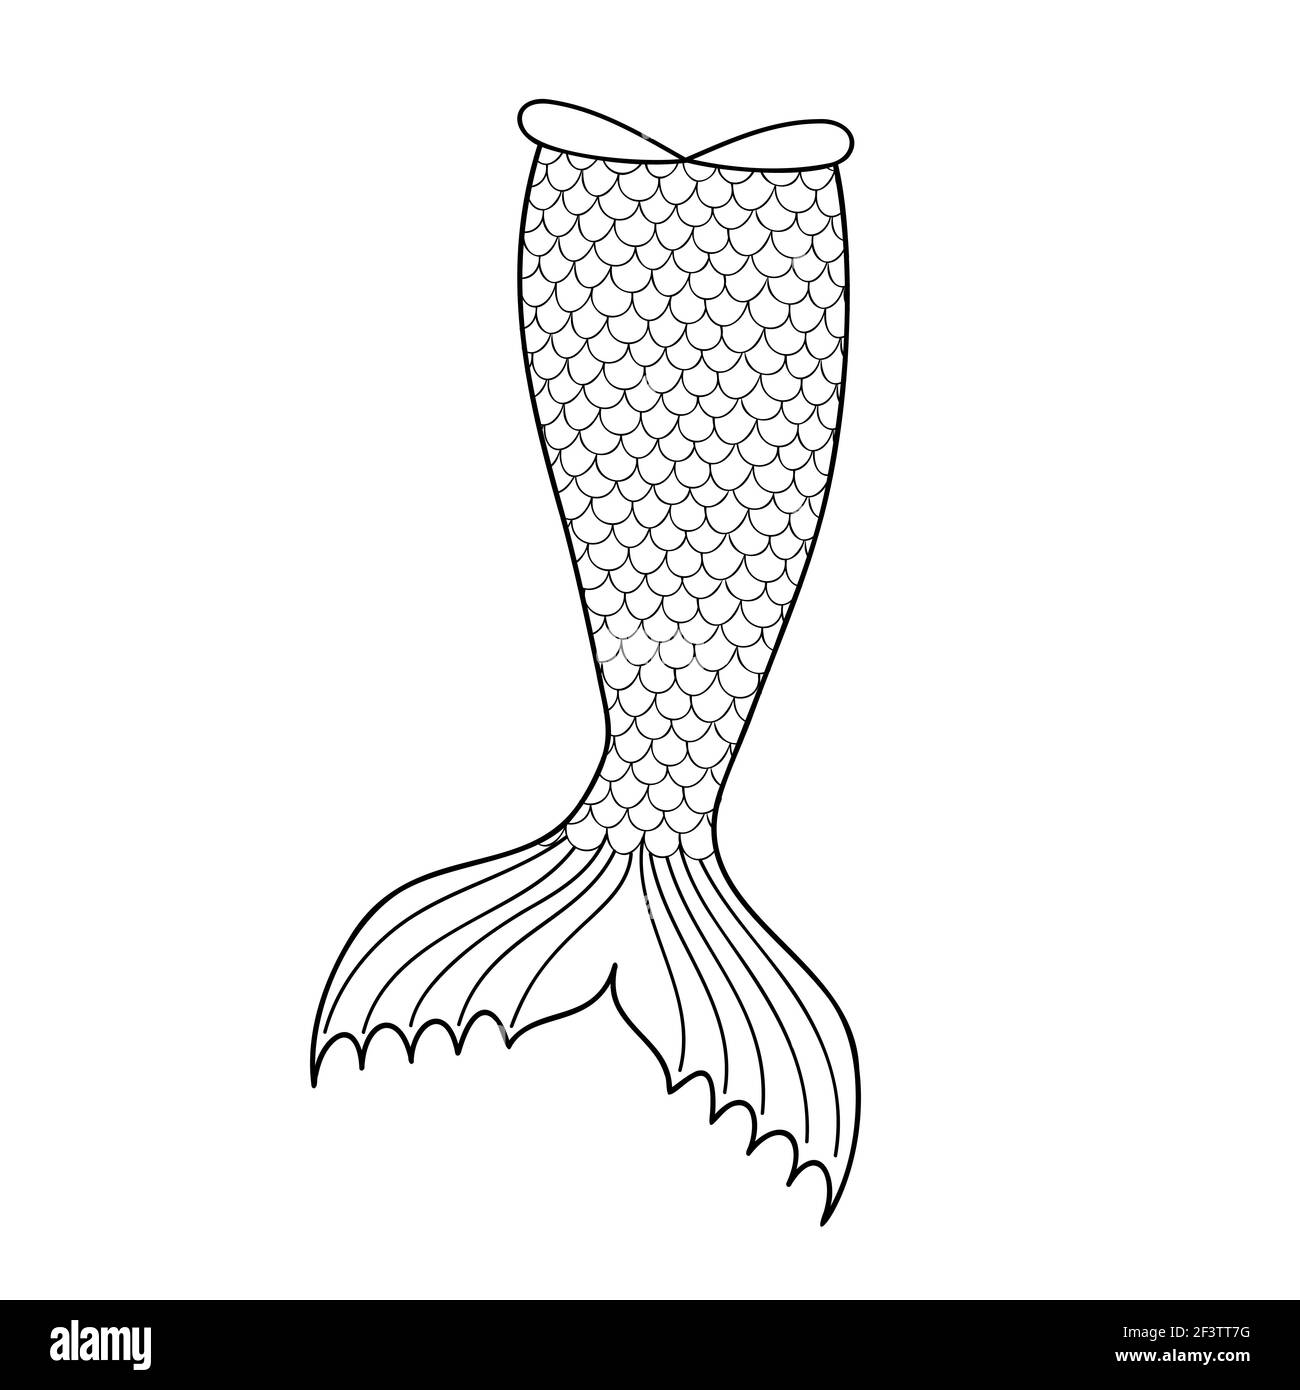 Hand drawn mermaid tail silhouette isolated on white background. Outline element for sea party, greeting or invitation card. Design for clothing print. Doodle vector illustration. Stock Vector